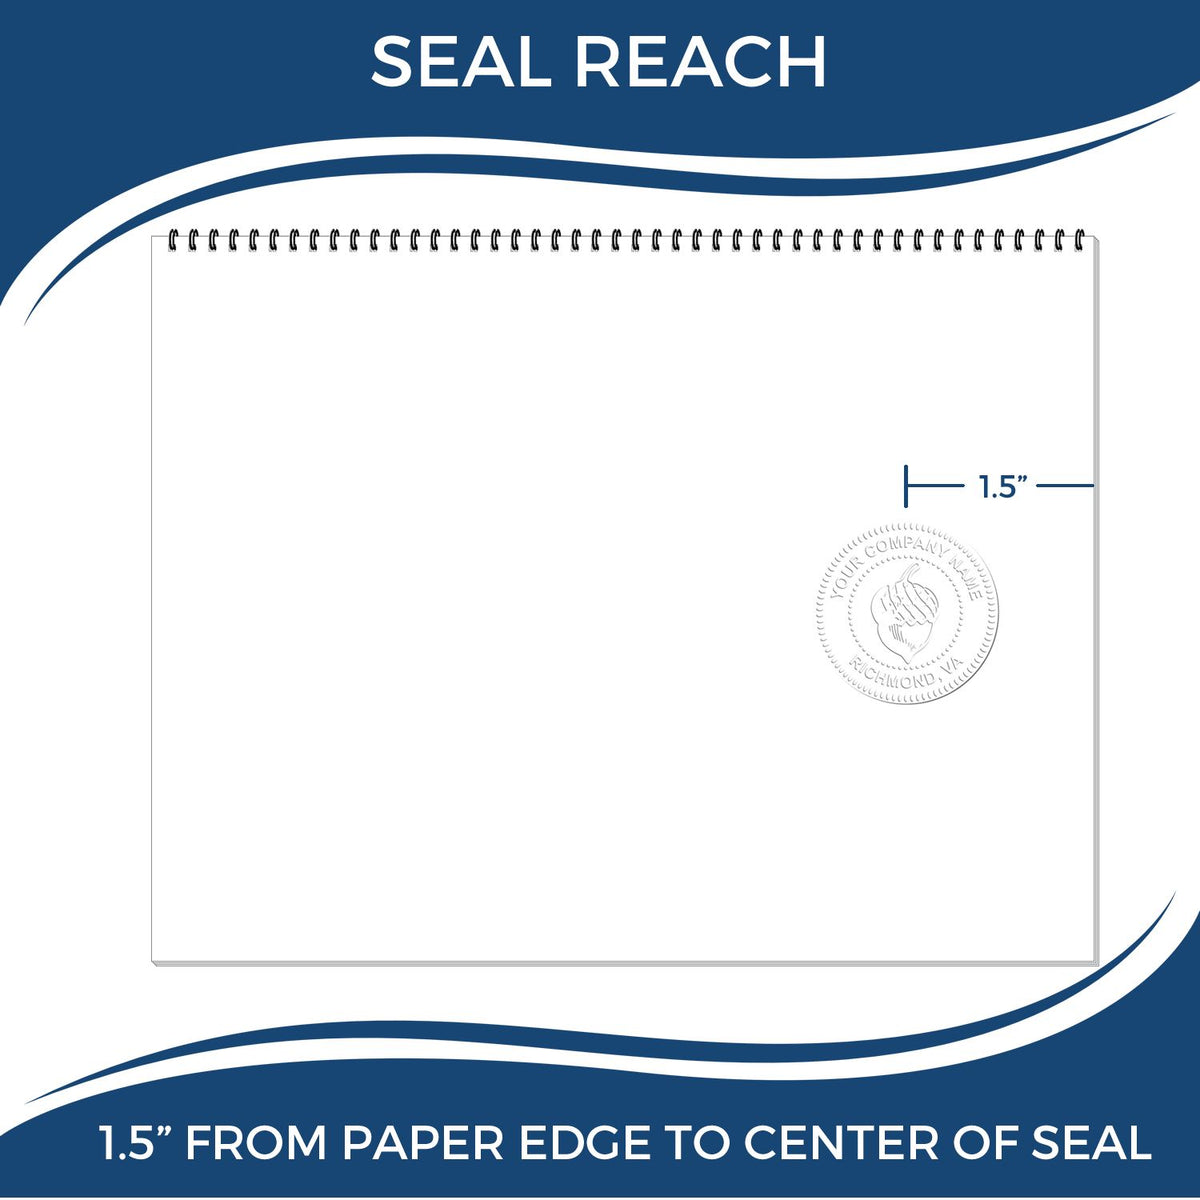 An infographic showing the seal reach which is represented by a ruler and a miniature seal image of the Guam Geologist Desk Seal